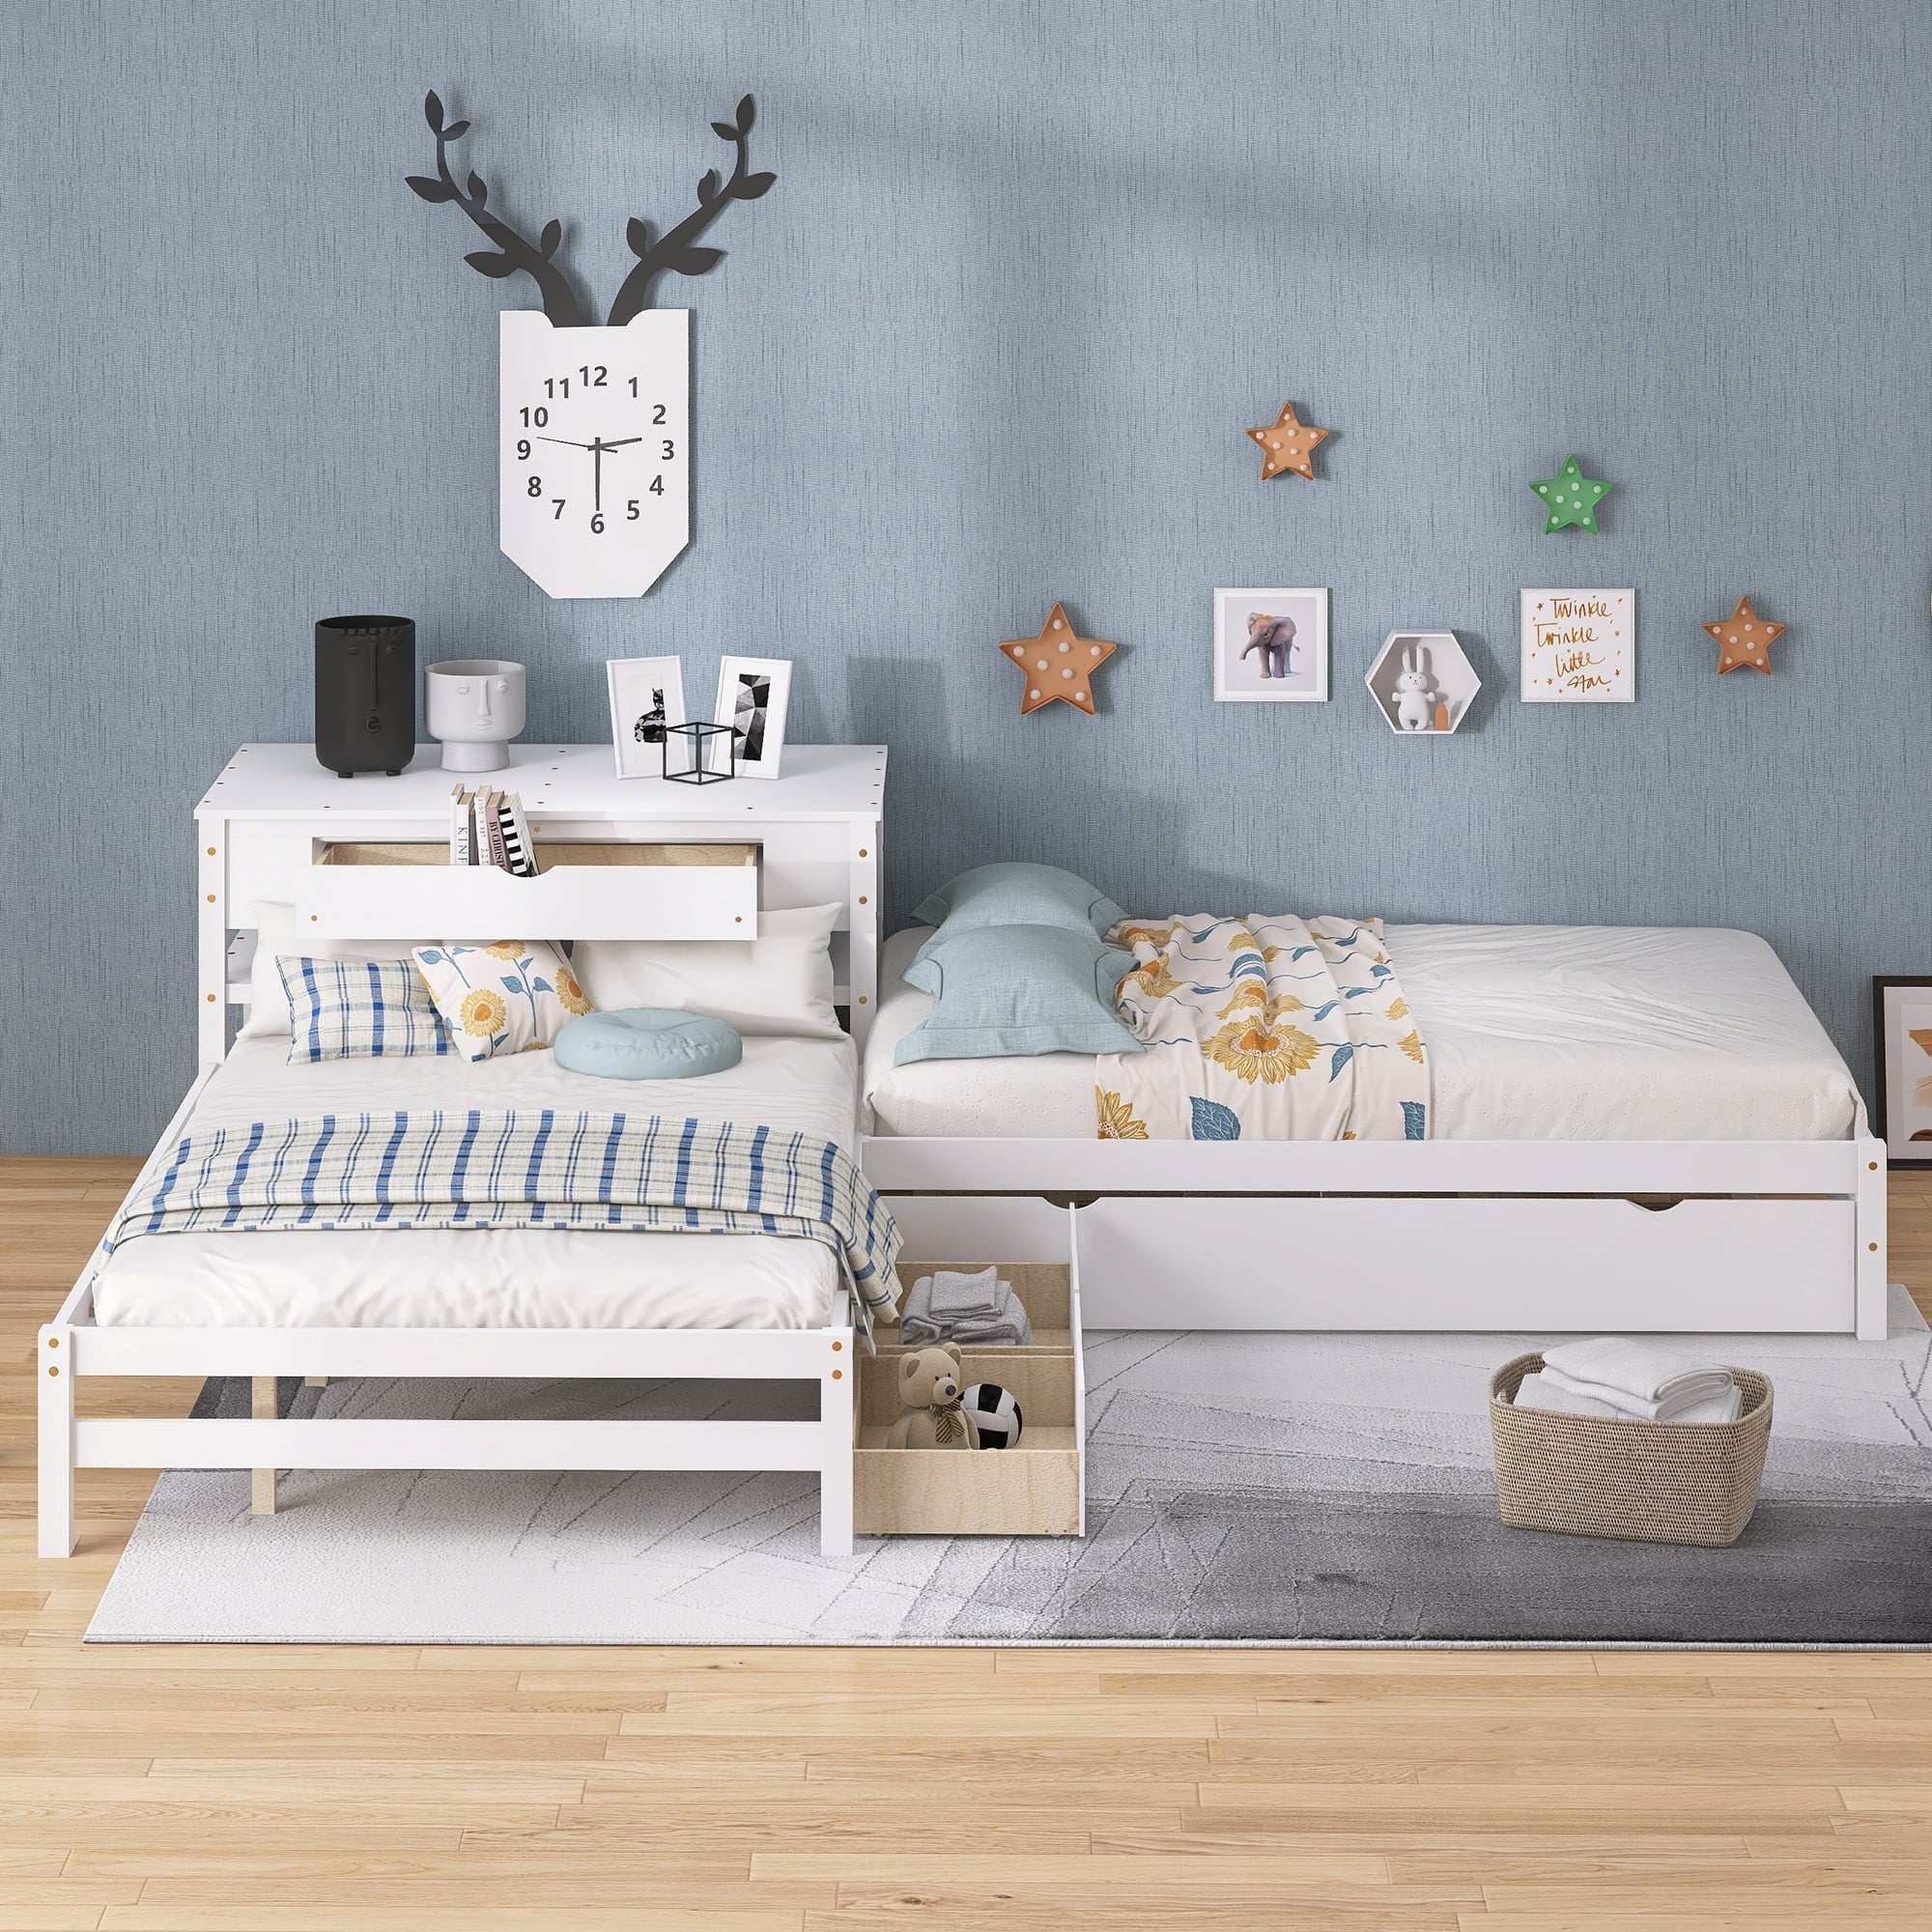 Full L-Shaped Platform Beds with Trundle, Drawers and Table for Kids Bedroom, White